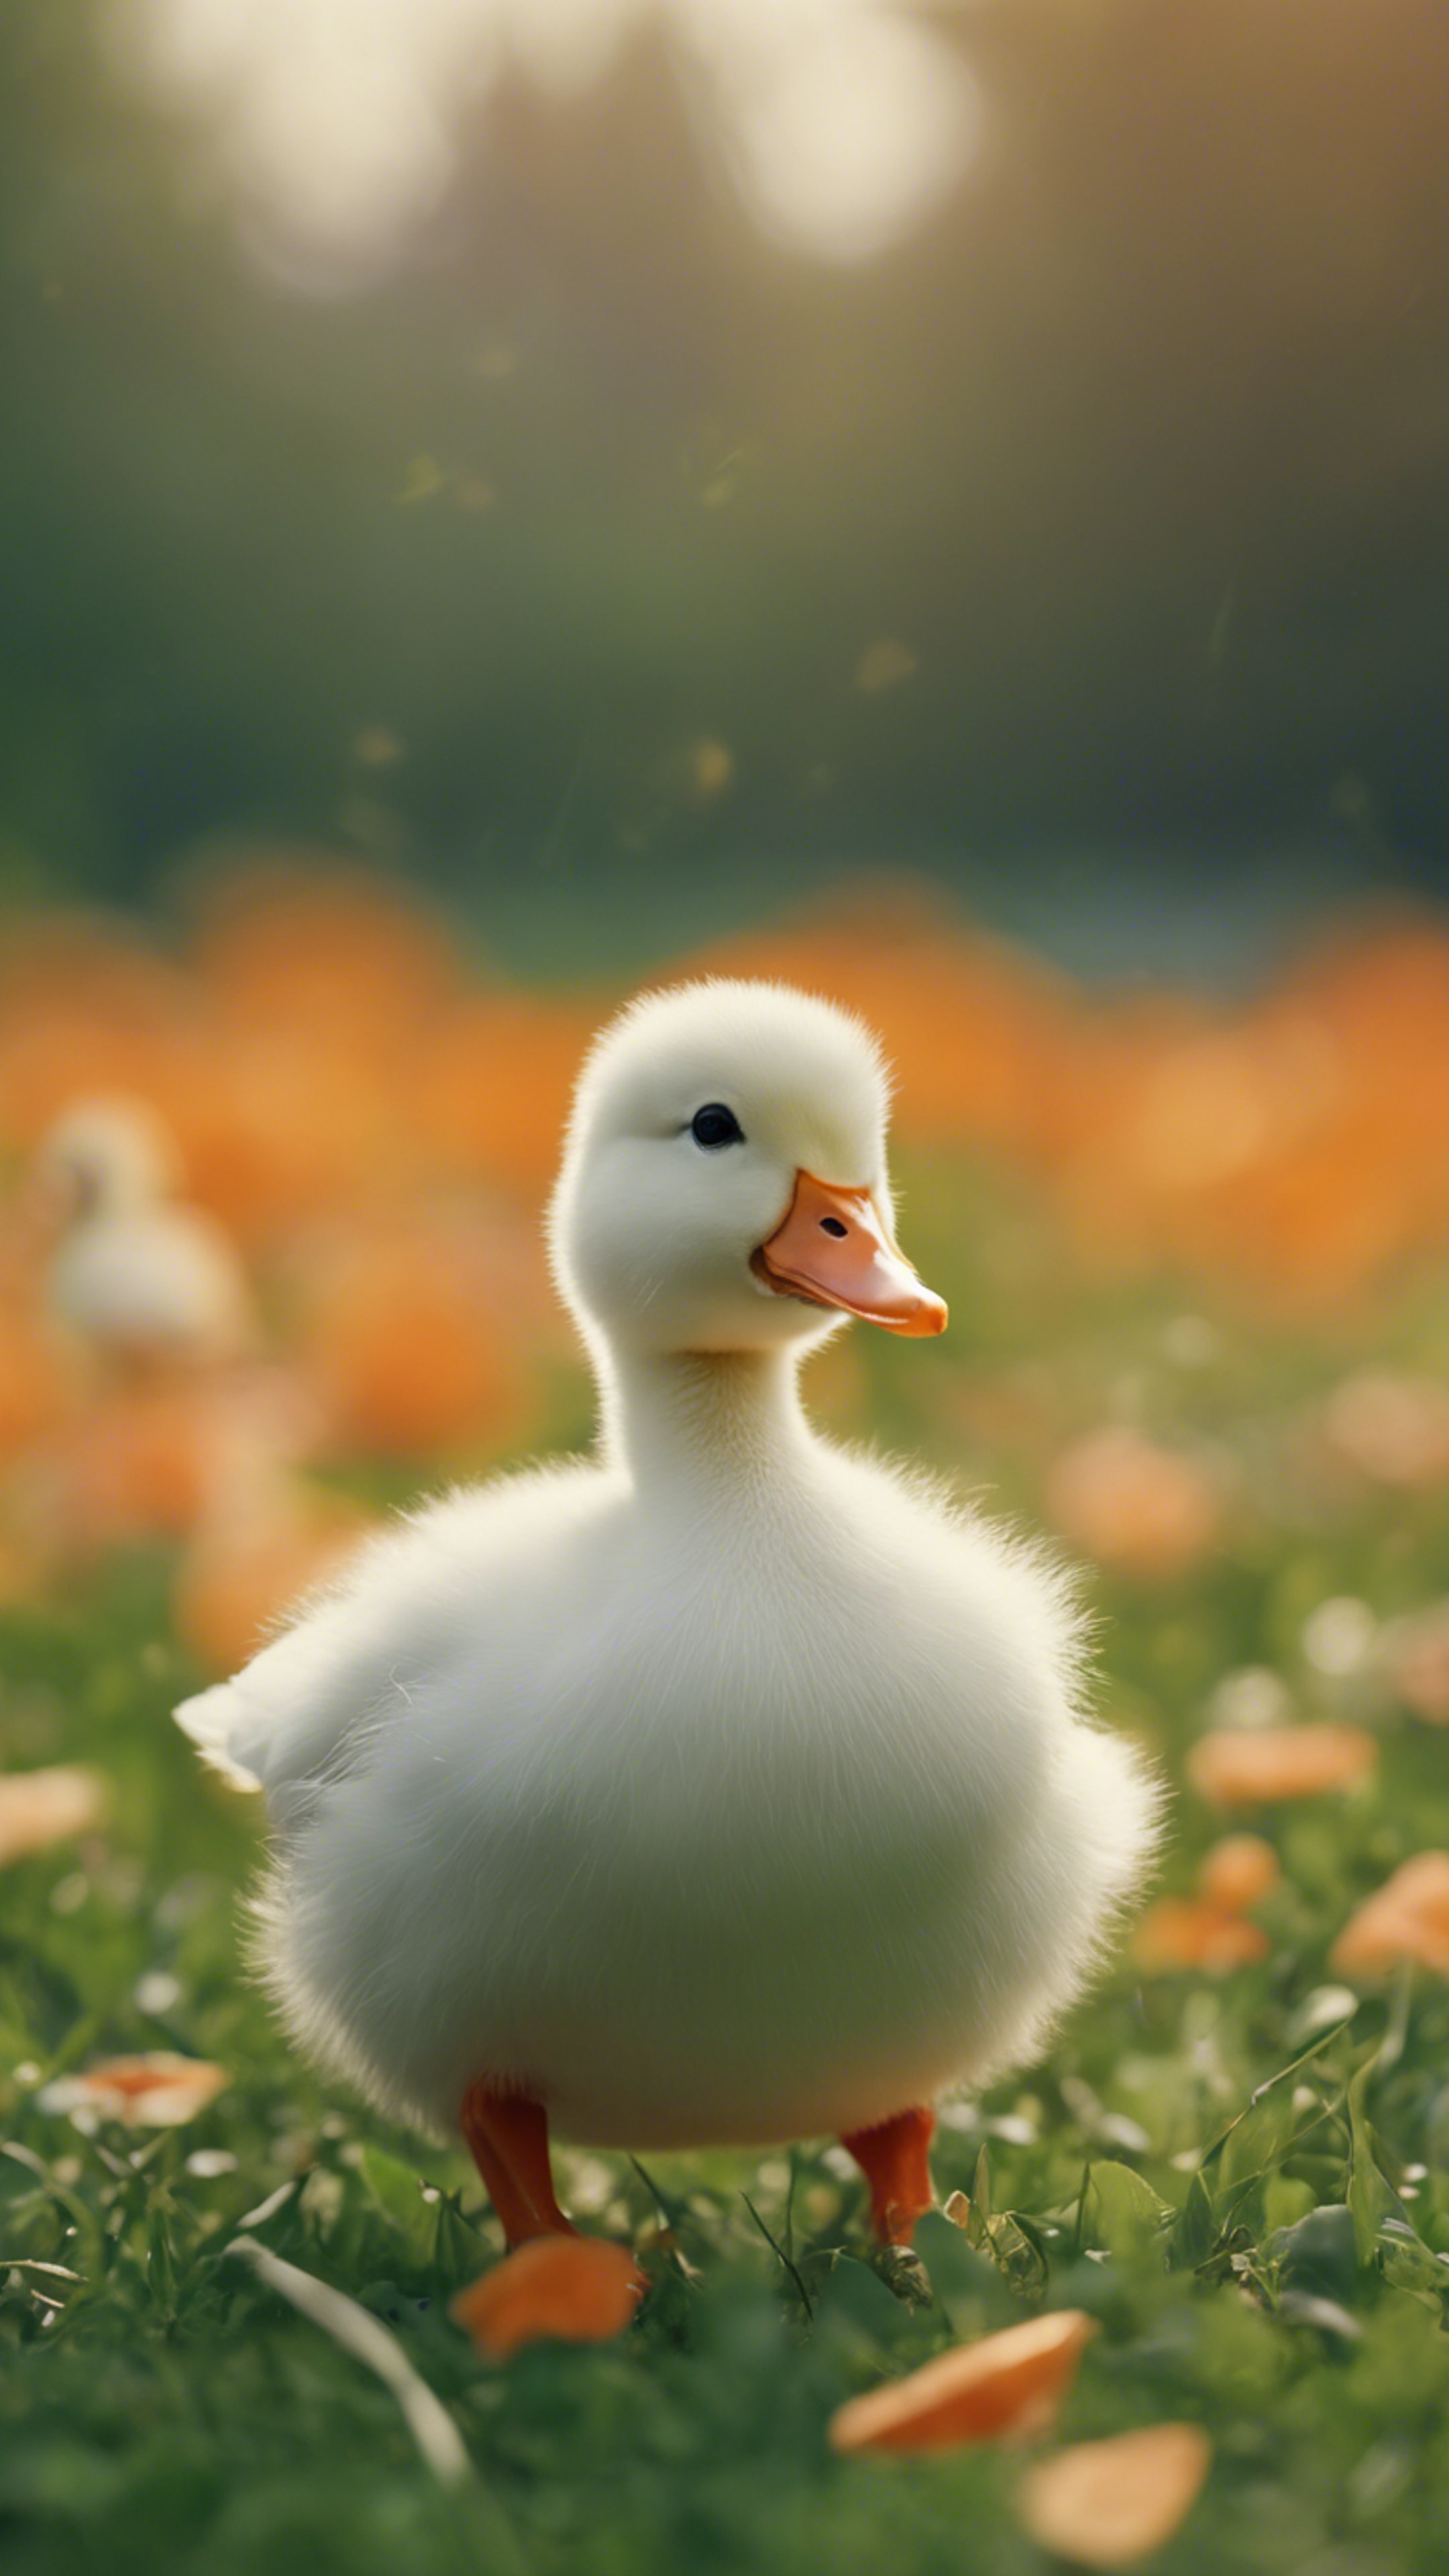 An adorable fluffy white duck with a bright orange bill is waddling happily across a green meadow. Tapeta[c976b0c80c1040dead0f]